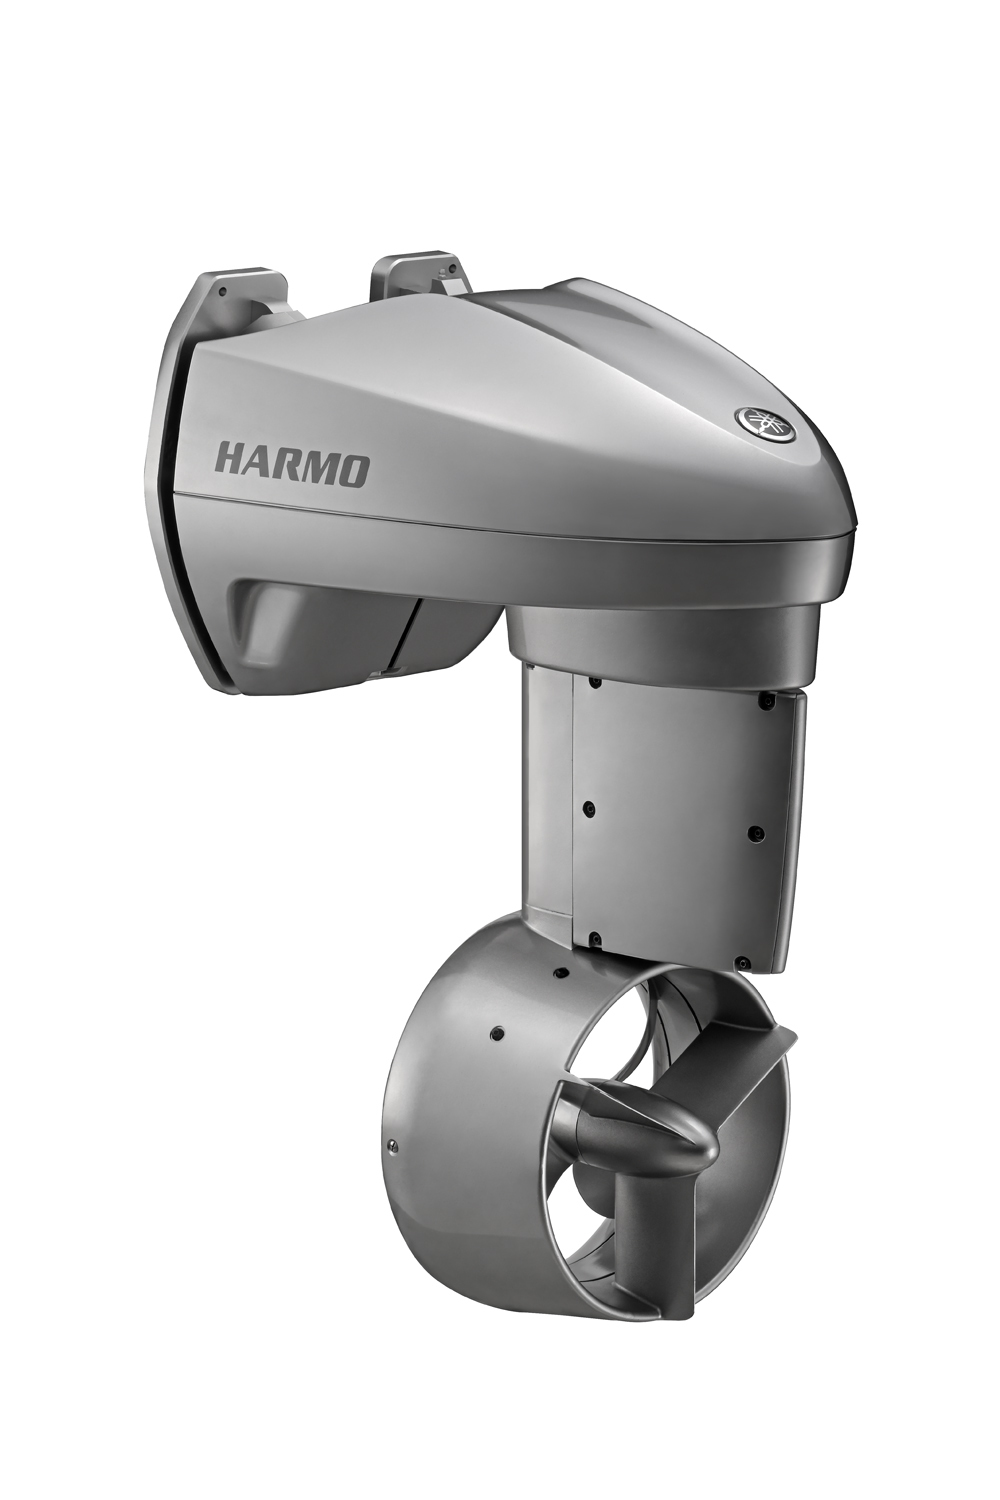 Yamaha introduced its first electric outboard! This particular